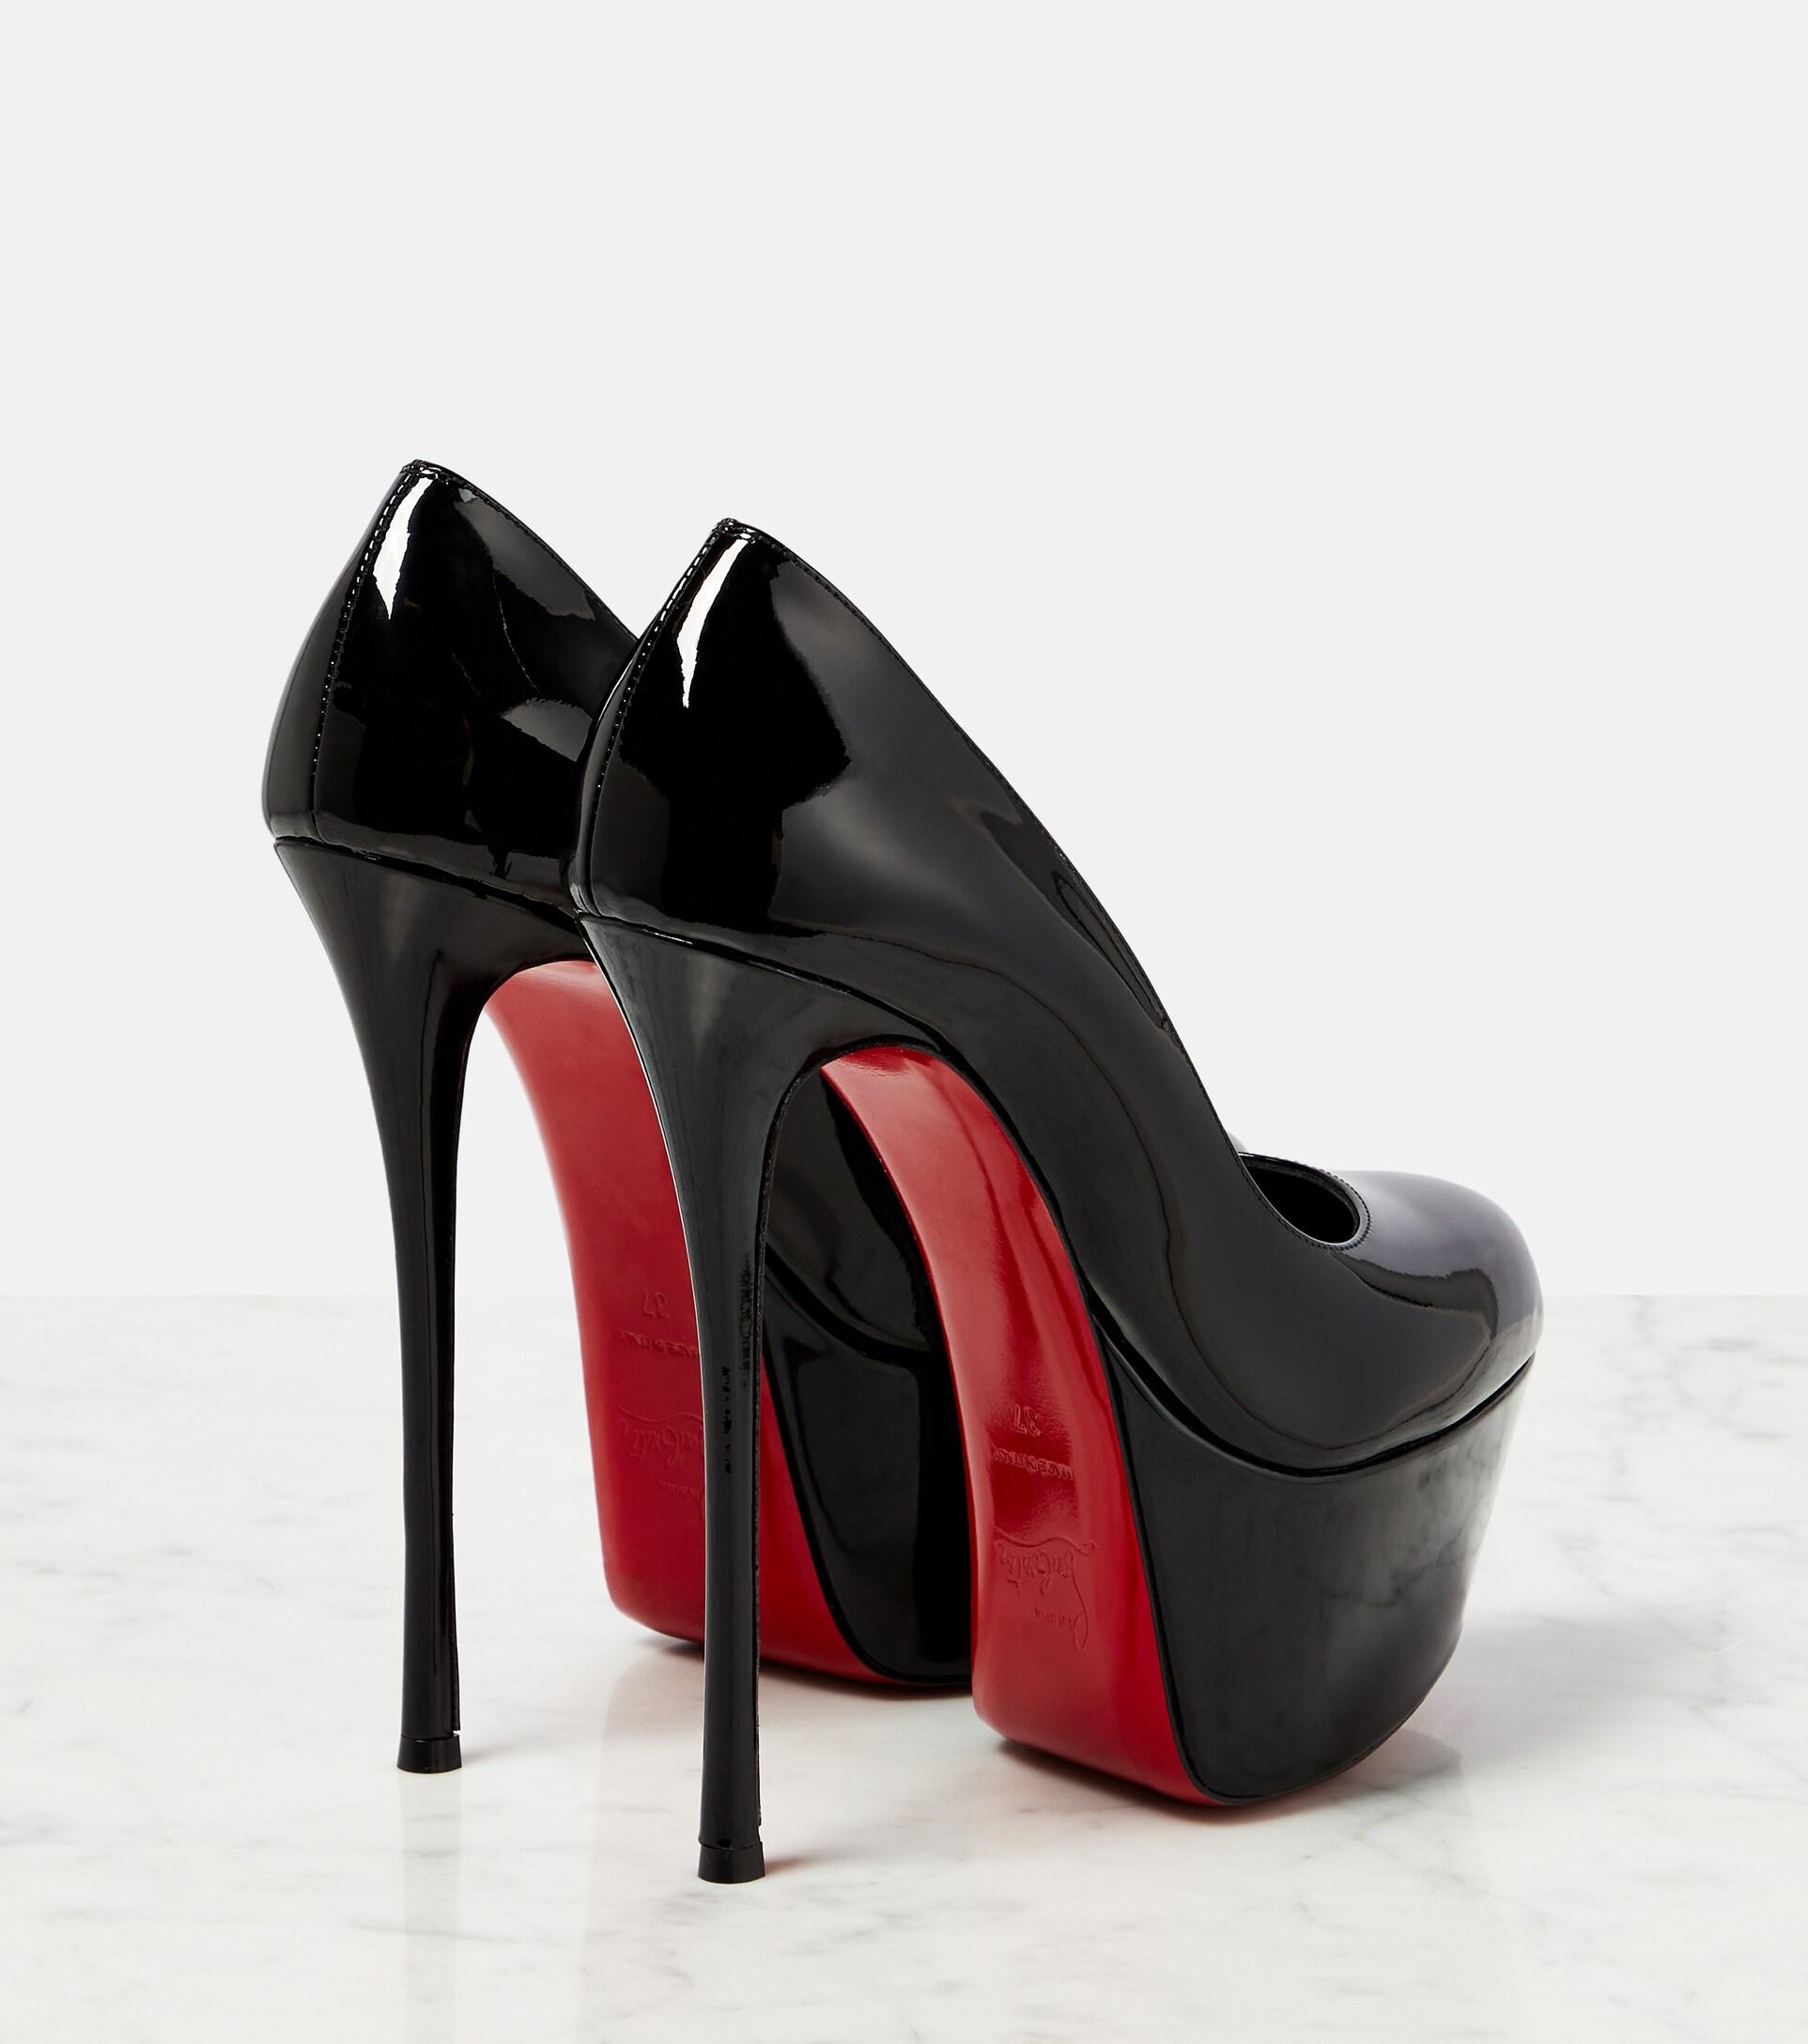 Dolly Booty Alta 160 Leather Platform Boots in Black - Christian Louboutin